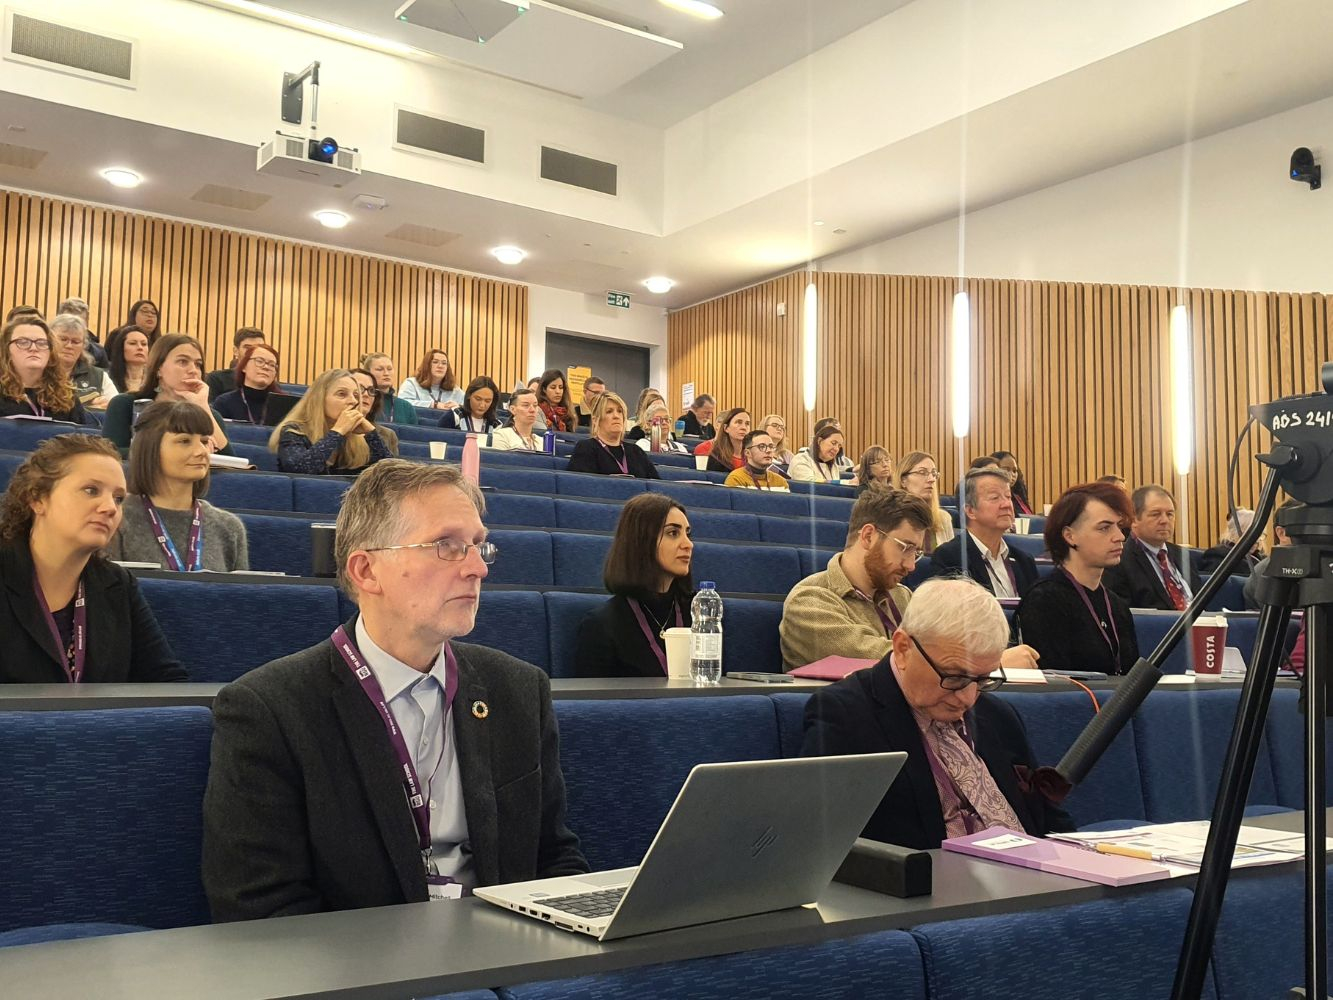 Delegates at the conference in the lecture theatre